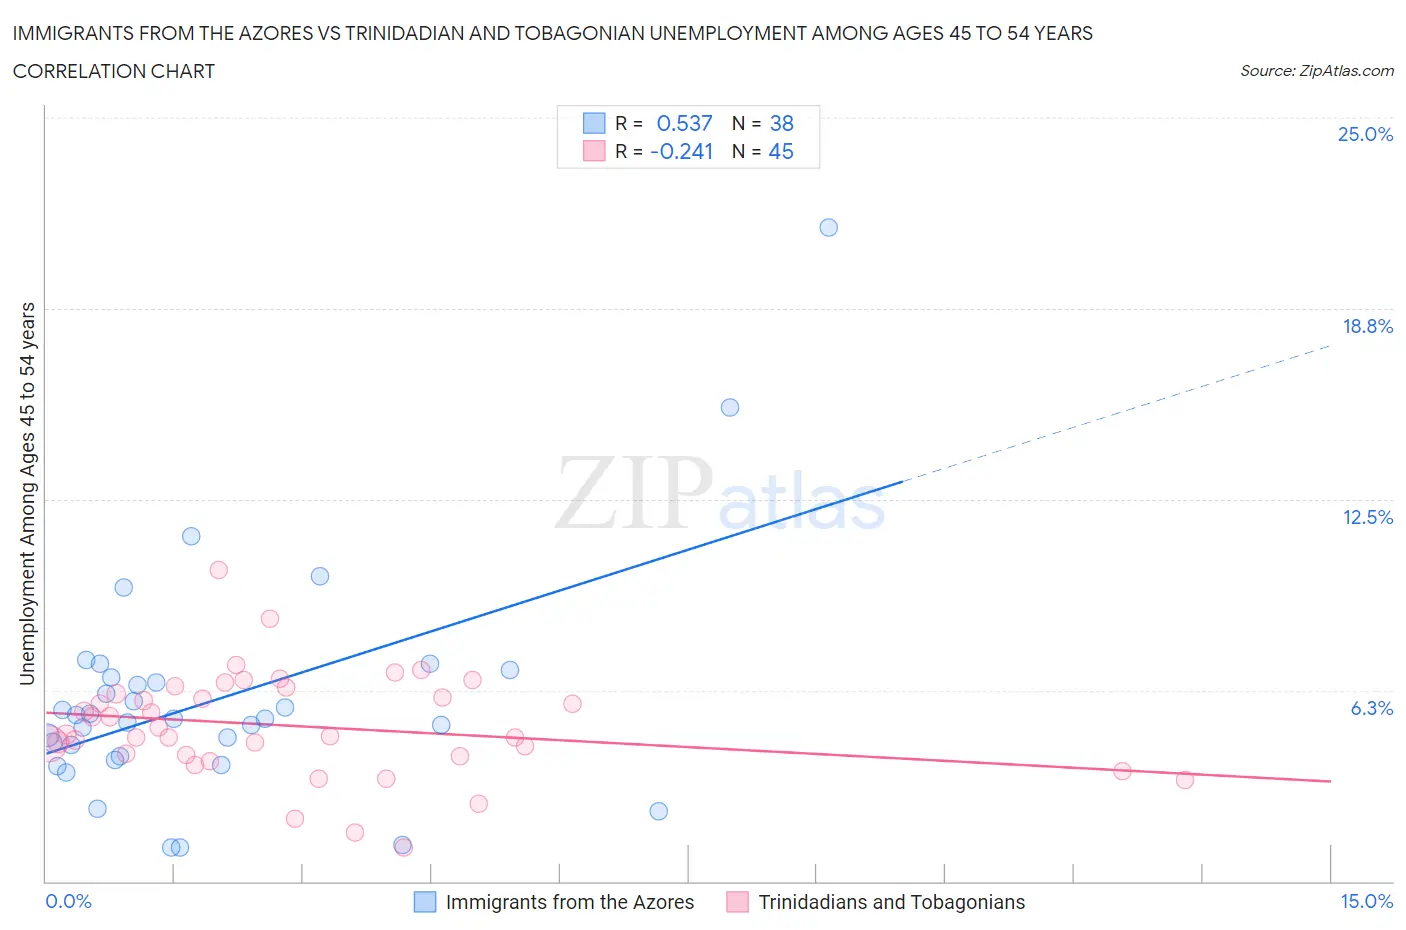 Immigrants from the Azores vs Trinidadian and Tobagonian Unemployment Among Ages 45 to 54 years